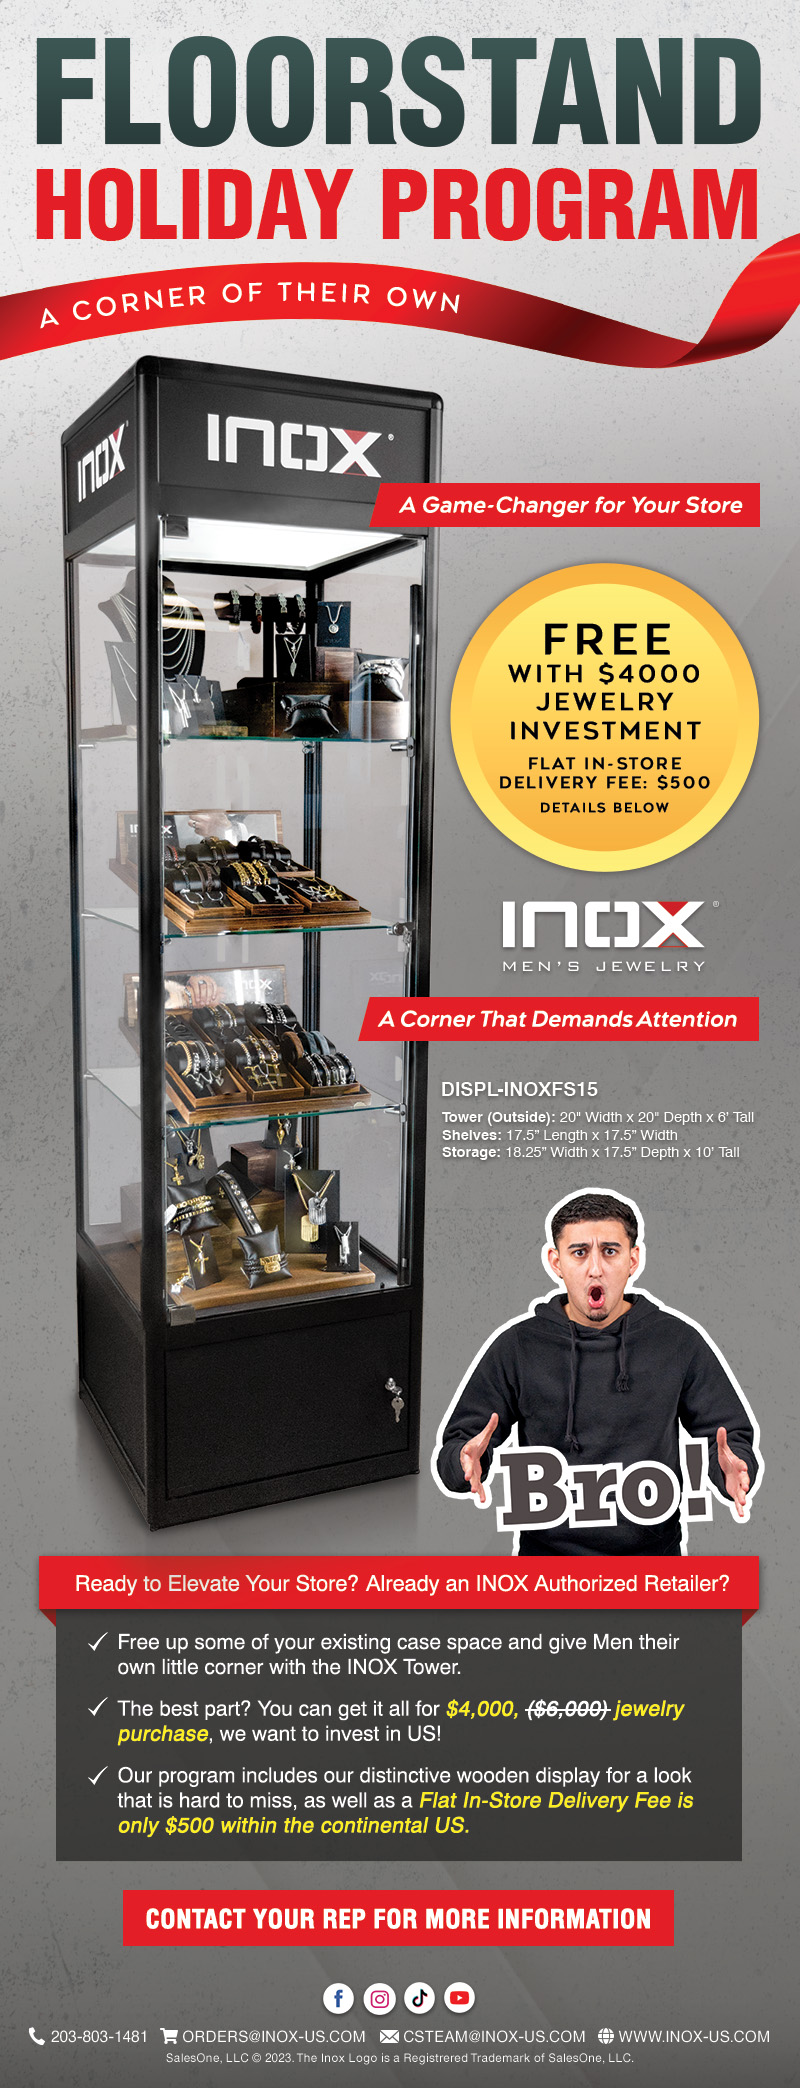 INOX Floorstand Holiday Program: A Game-Changer for your store.